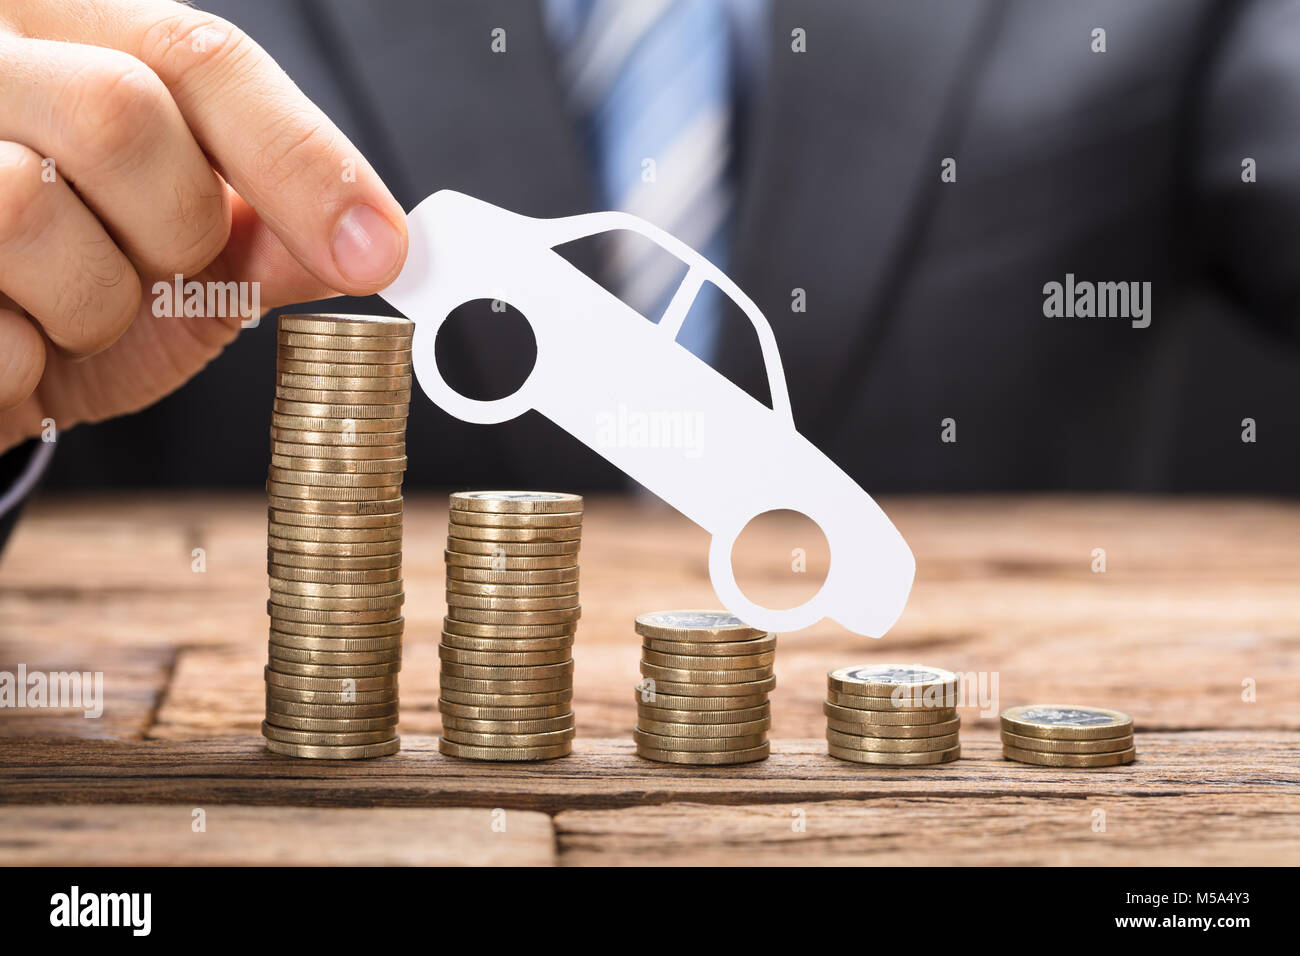 Businessman holding paper car on stacked coins arranged in declining order on wooden table Stock Photo